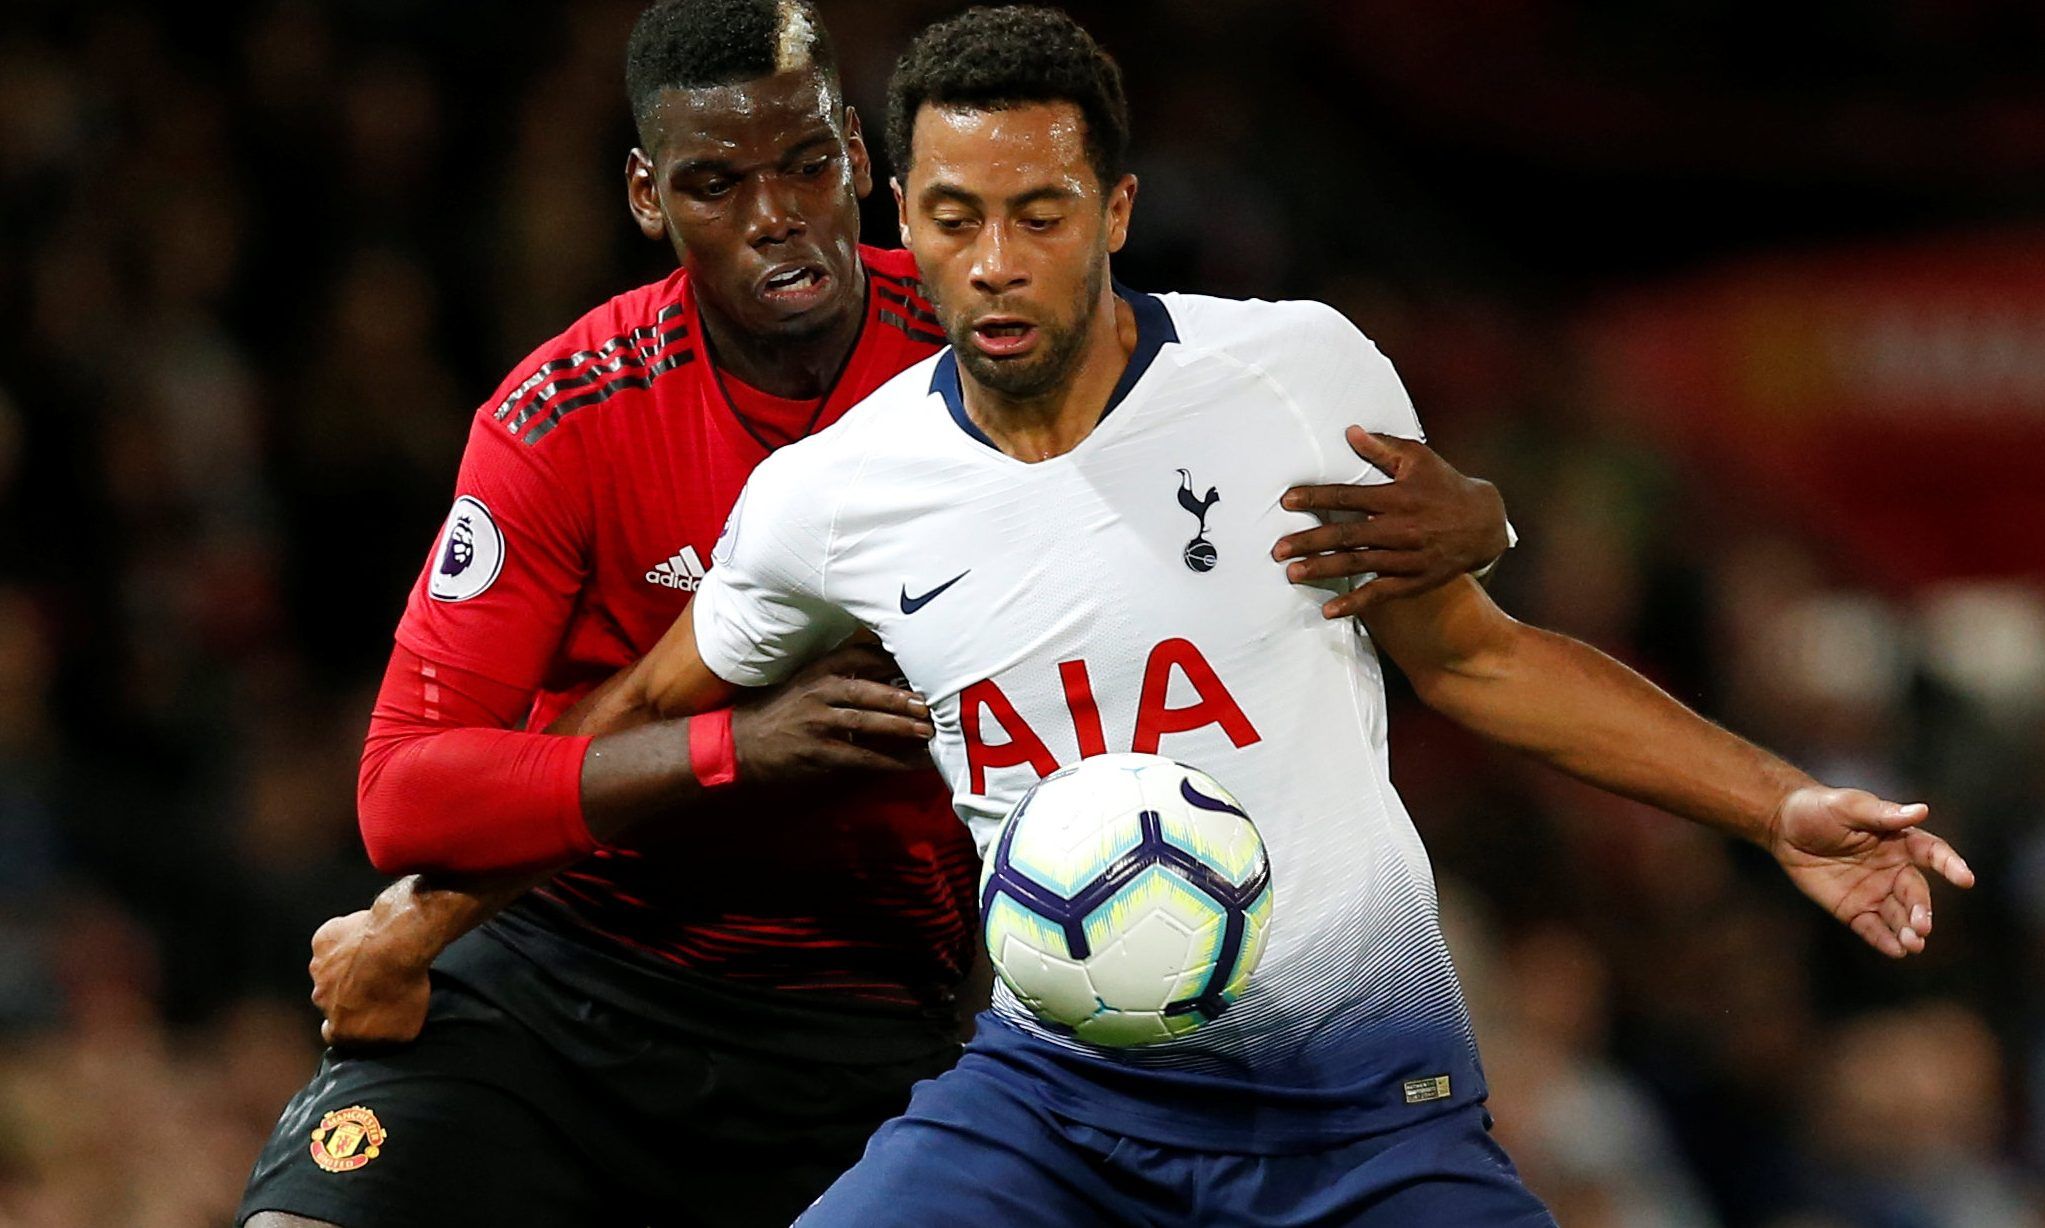 Soccer Football - Premier League - Manchester United v Tottenham Hotspur - Old Trafford, Manchester, Britain - August 27, 2018   Tottenham's Mousa Dembele in action with Manchester United's Paul Pogba                  REUTERS/Andrew Yates    EDITORIAL USE ONLY. No use with unauthorized audio, video, data, fixture lists, club/league logos or 